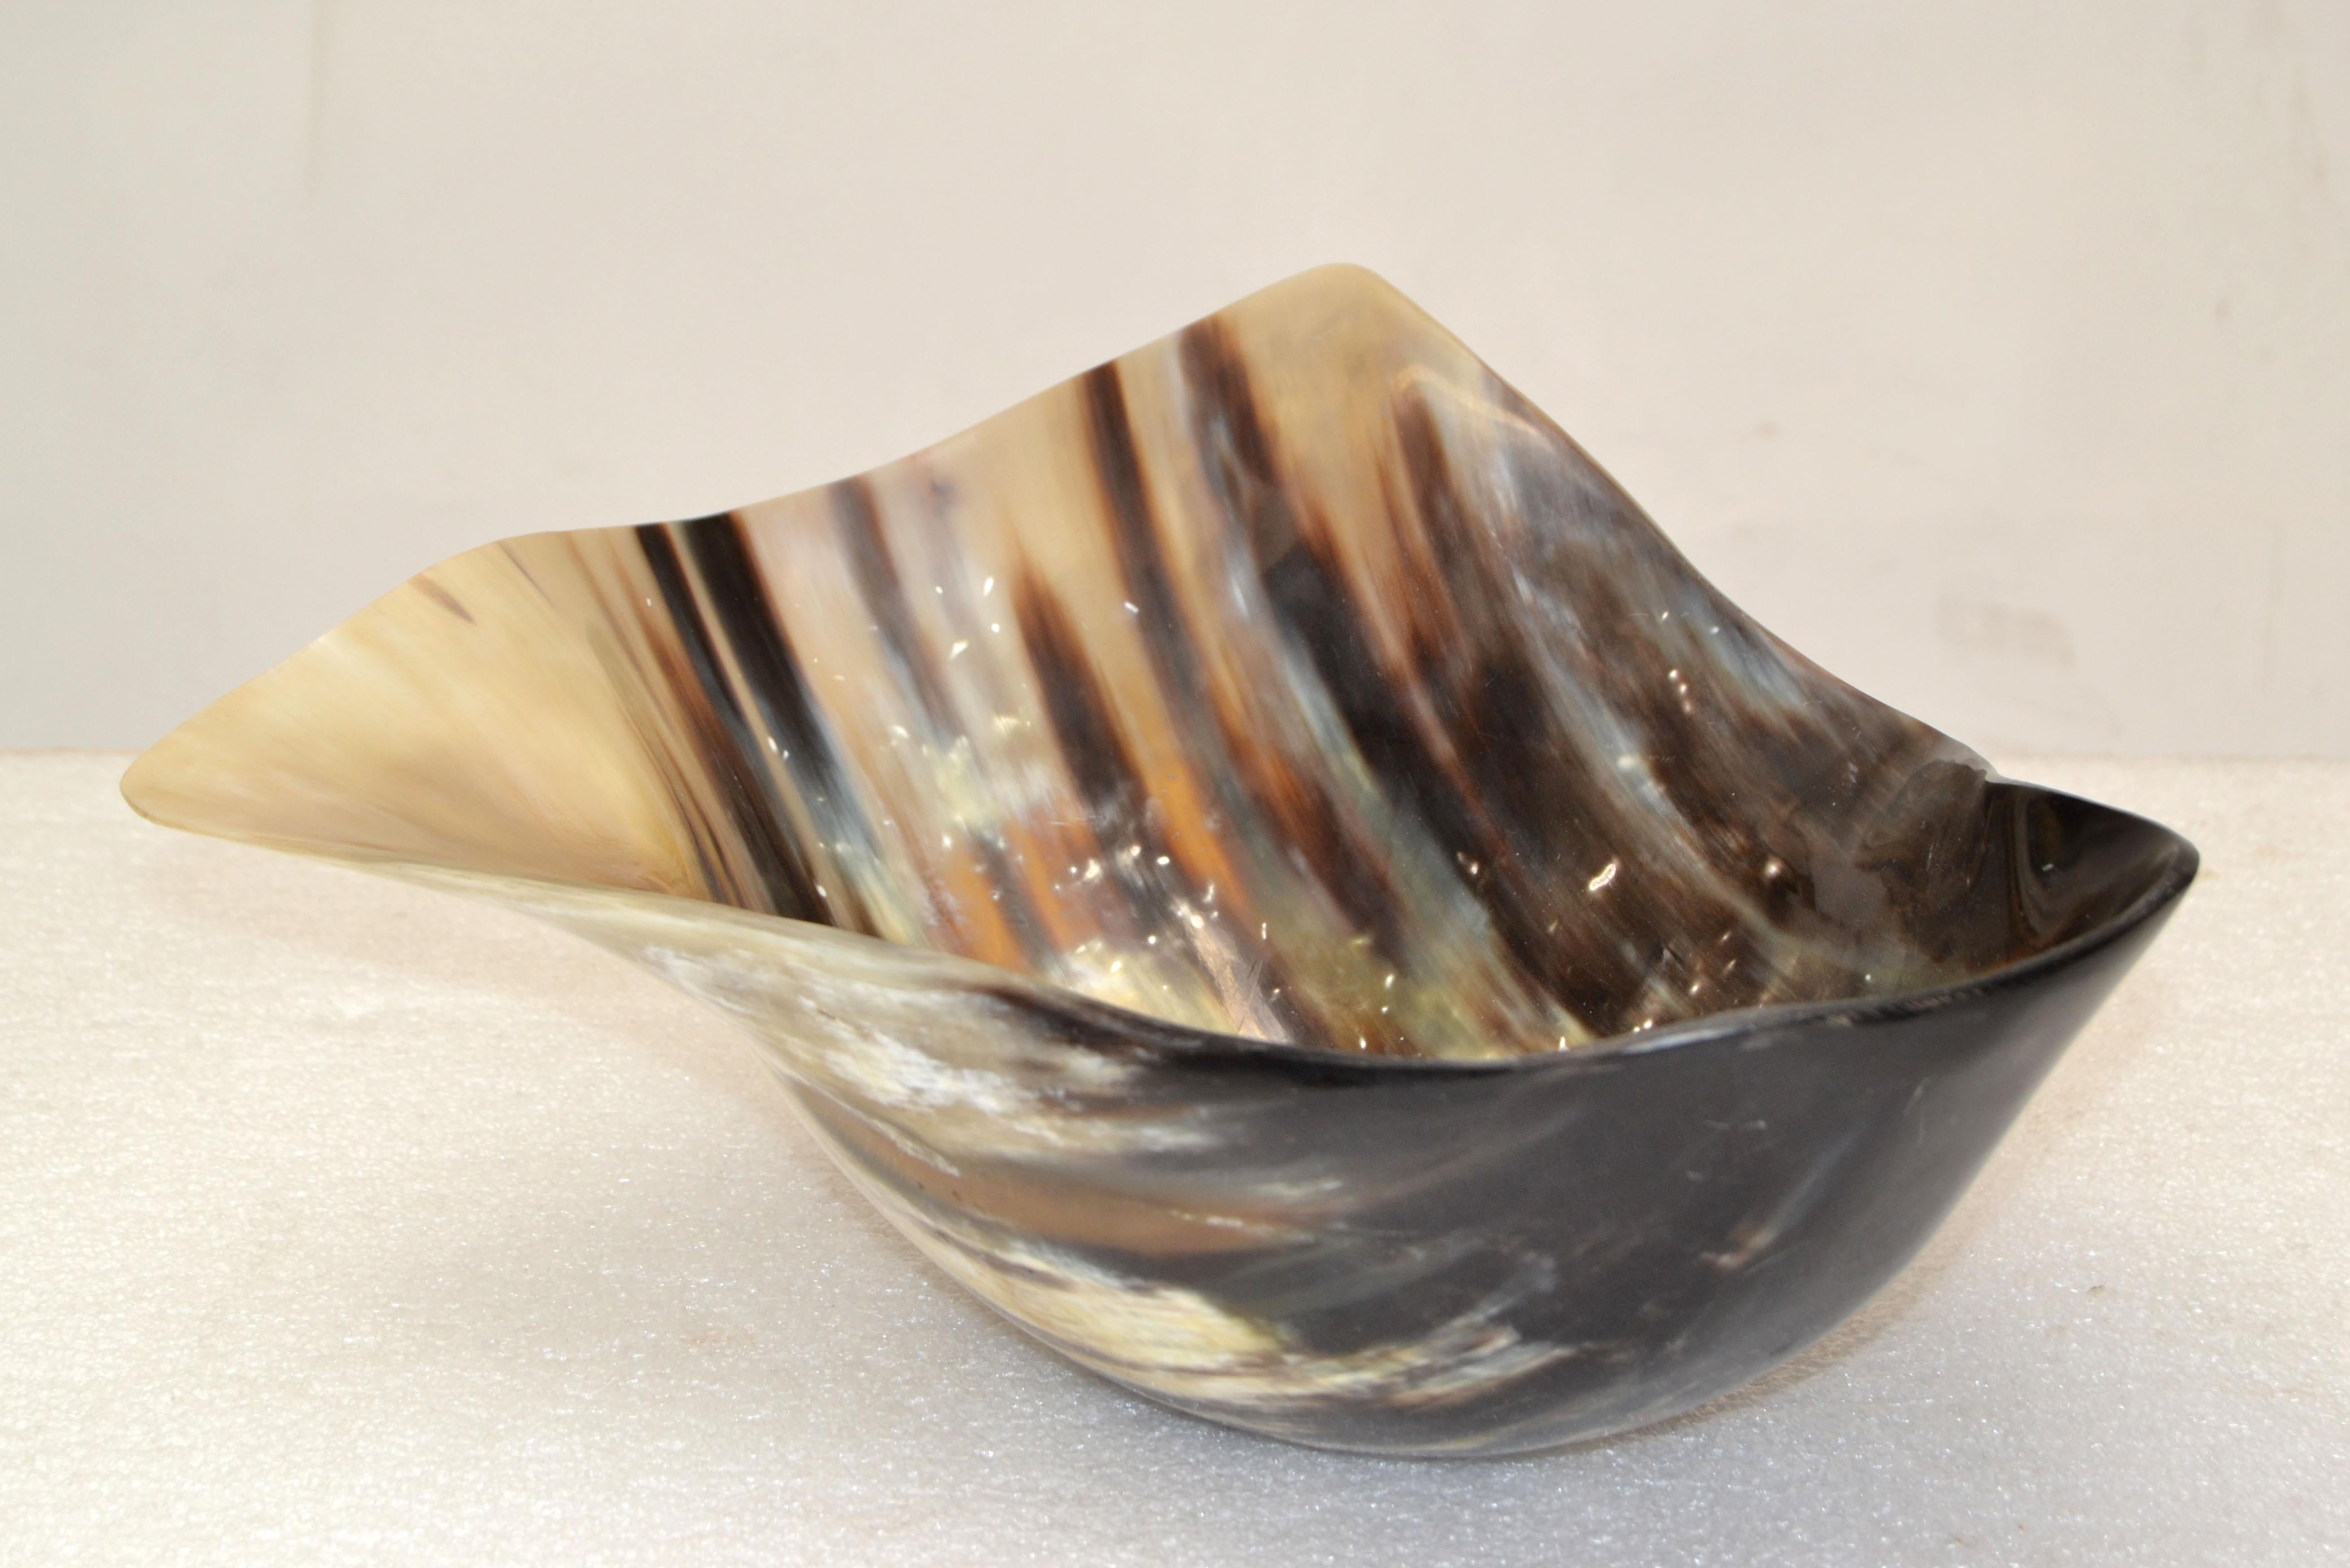 Polished Handmade Horn Bowl, Catchall, Vessel, Centerpiece Mid-Century Modern In Good Condition For Sale In Miami, FL